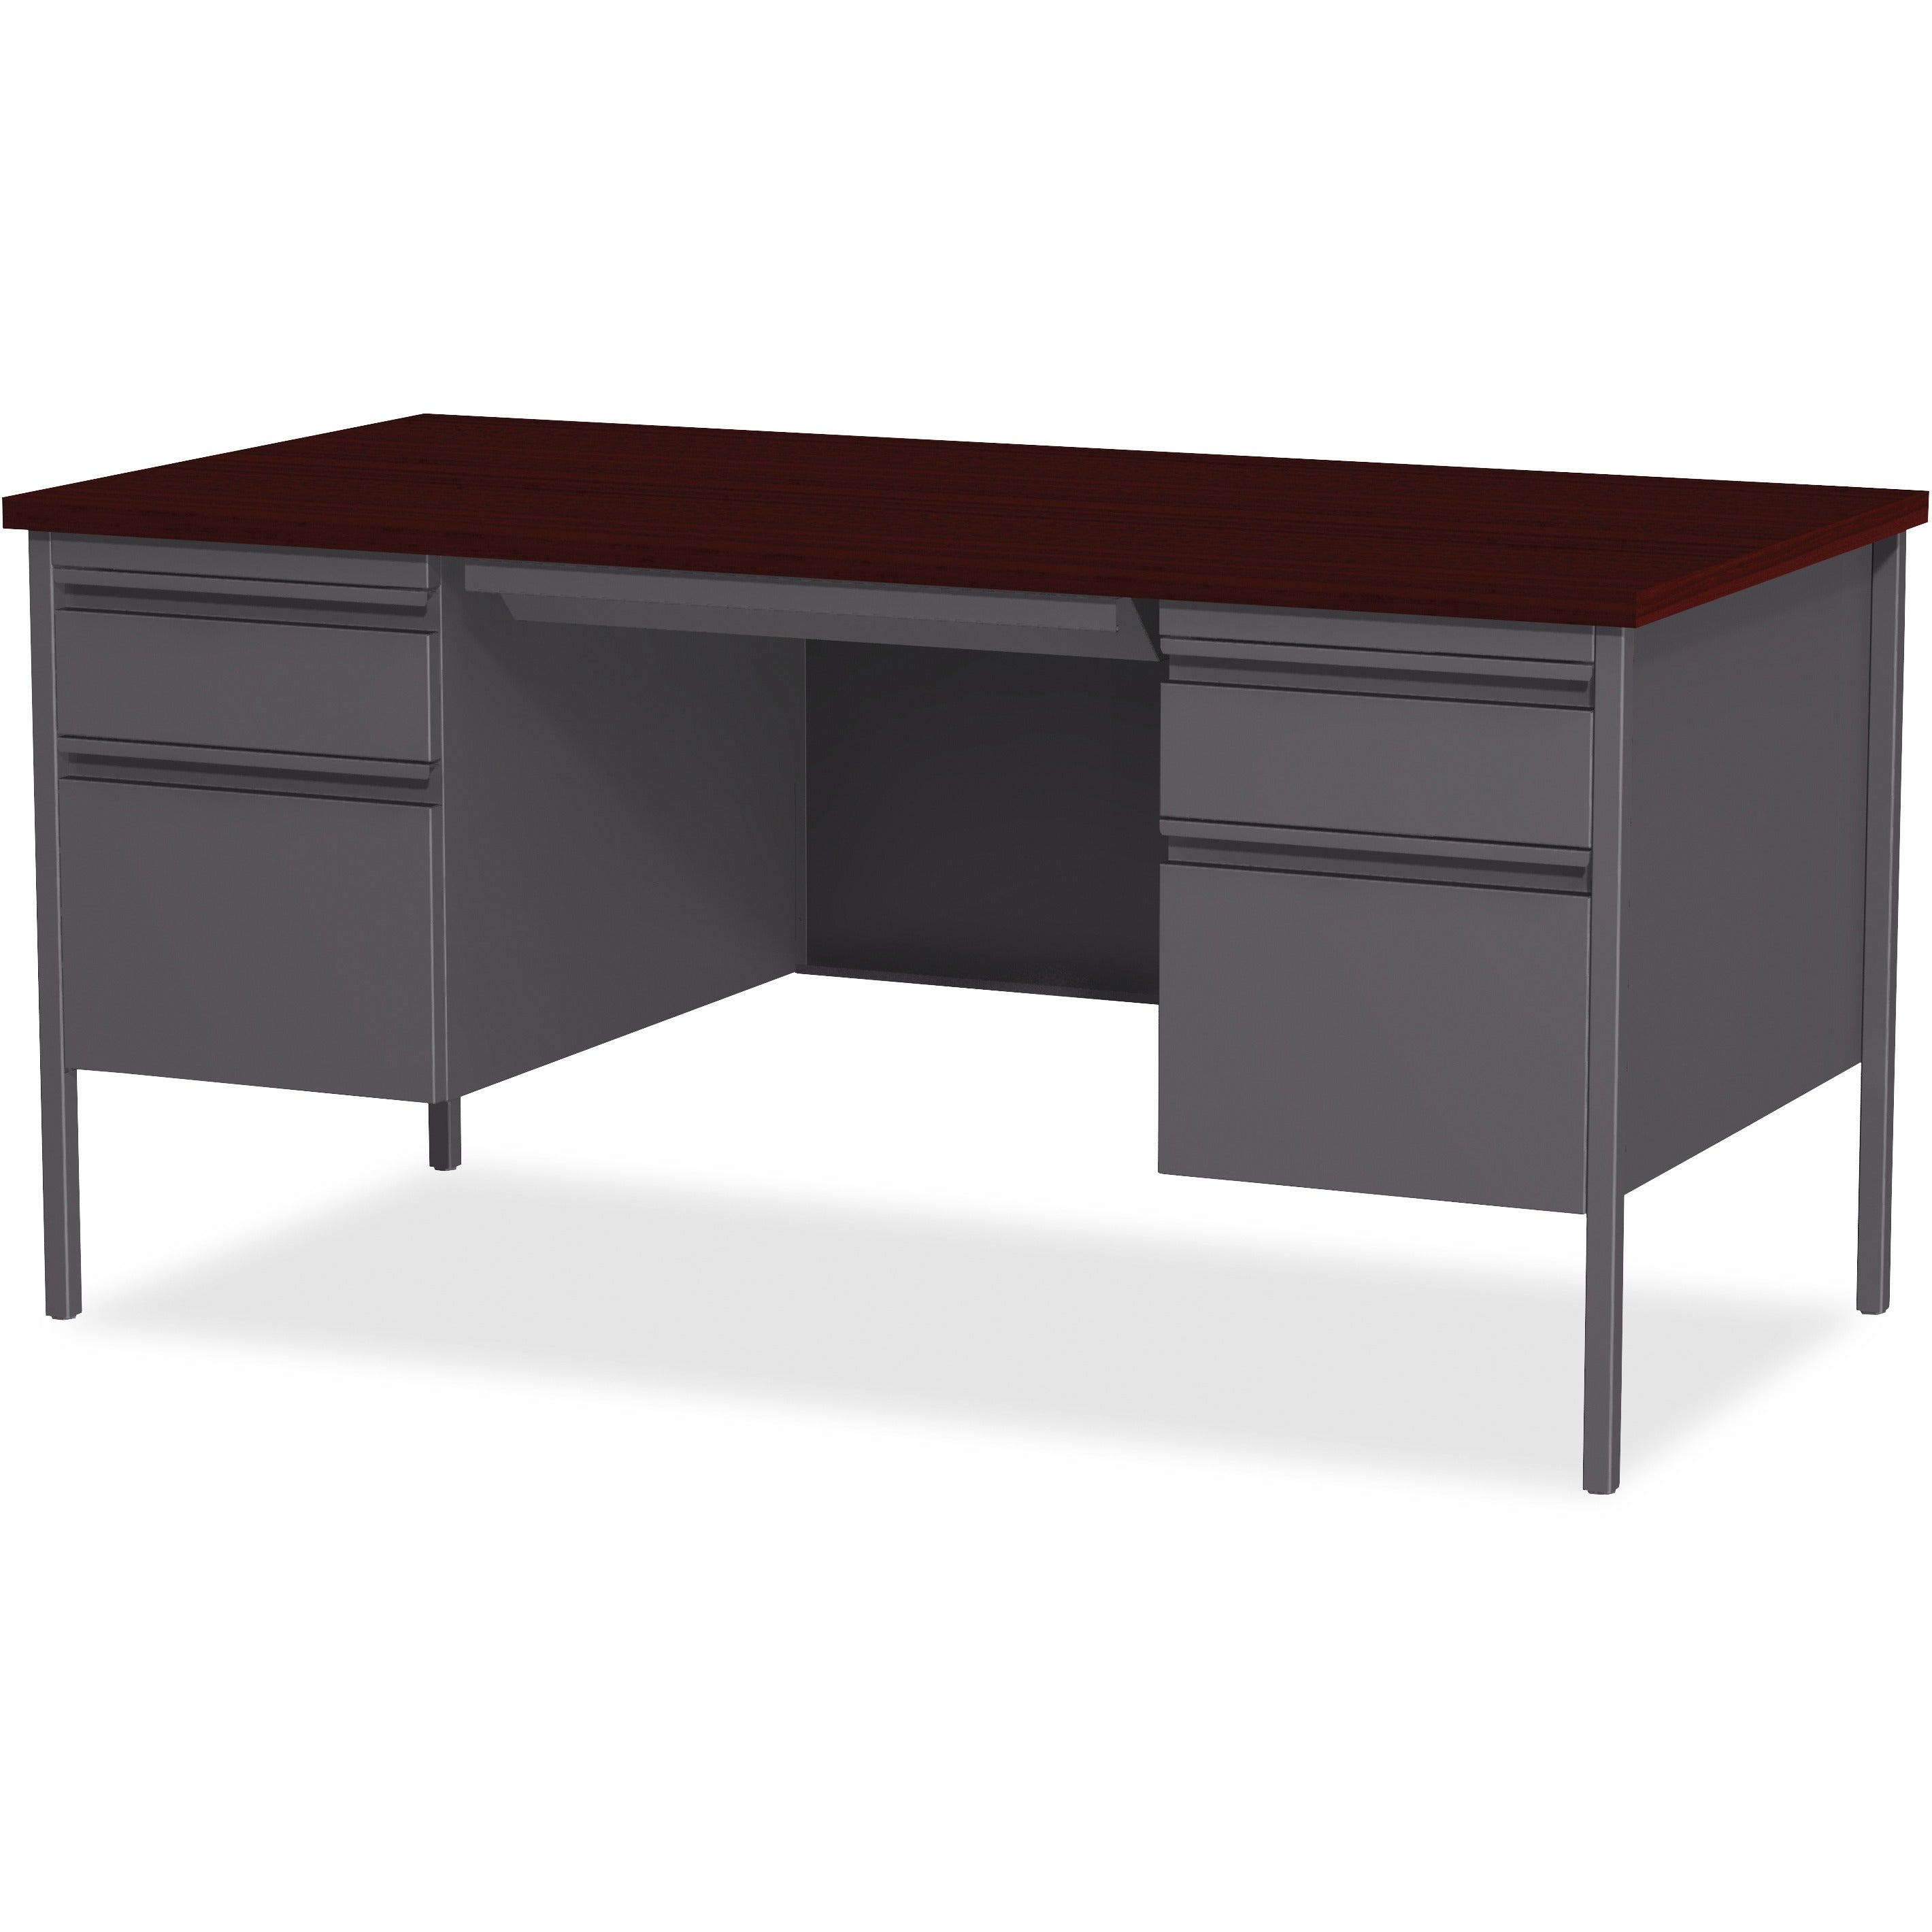 lorell-fortress-series-double-pedestal-desk-for-table-toprectangle-top-x-60-table-top-width-x-30-table-top-depth-x-112-table-top-thickness-2950-height-assembly-required-laminated-mahogany-steel-1-each_llr60928 - 3